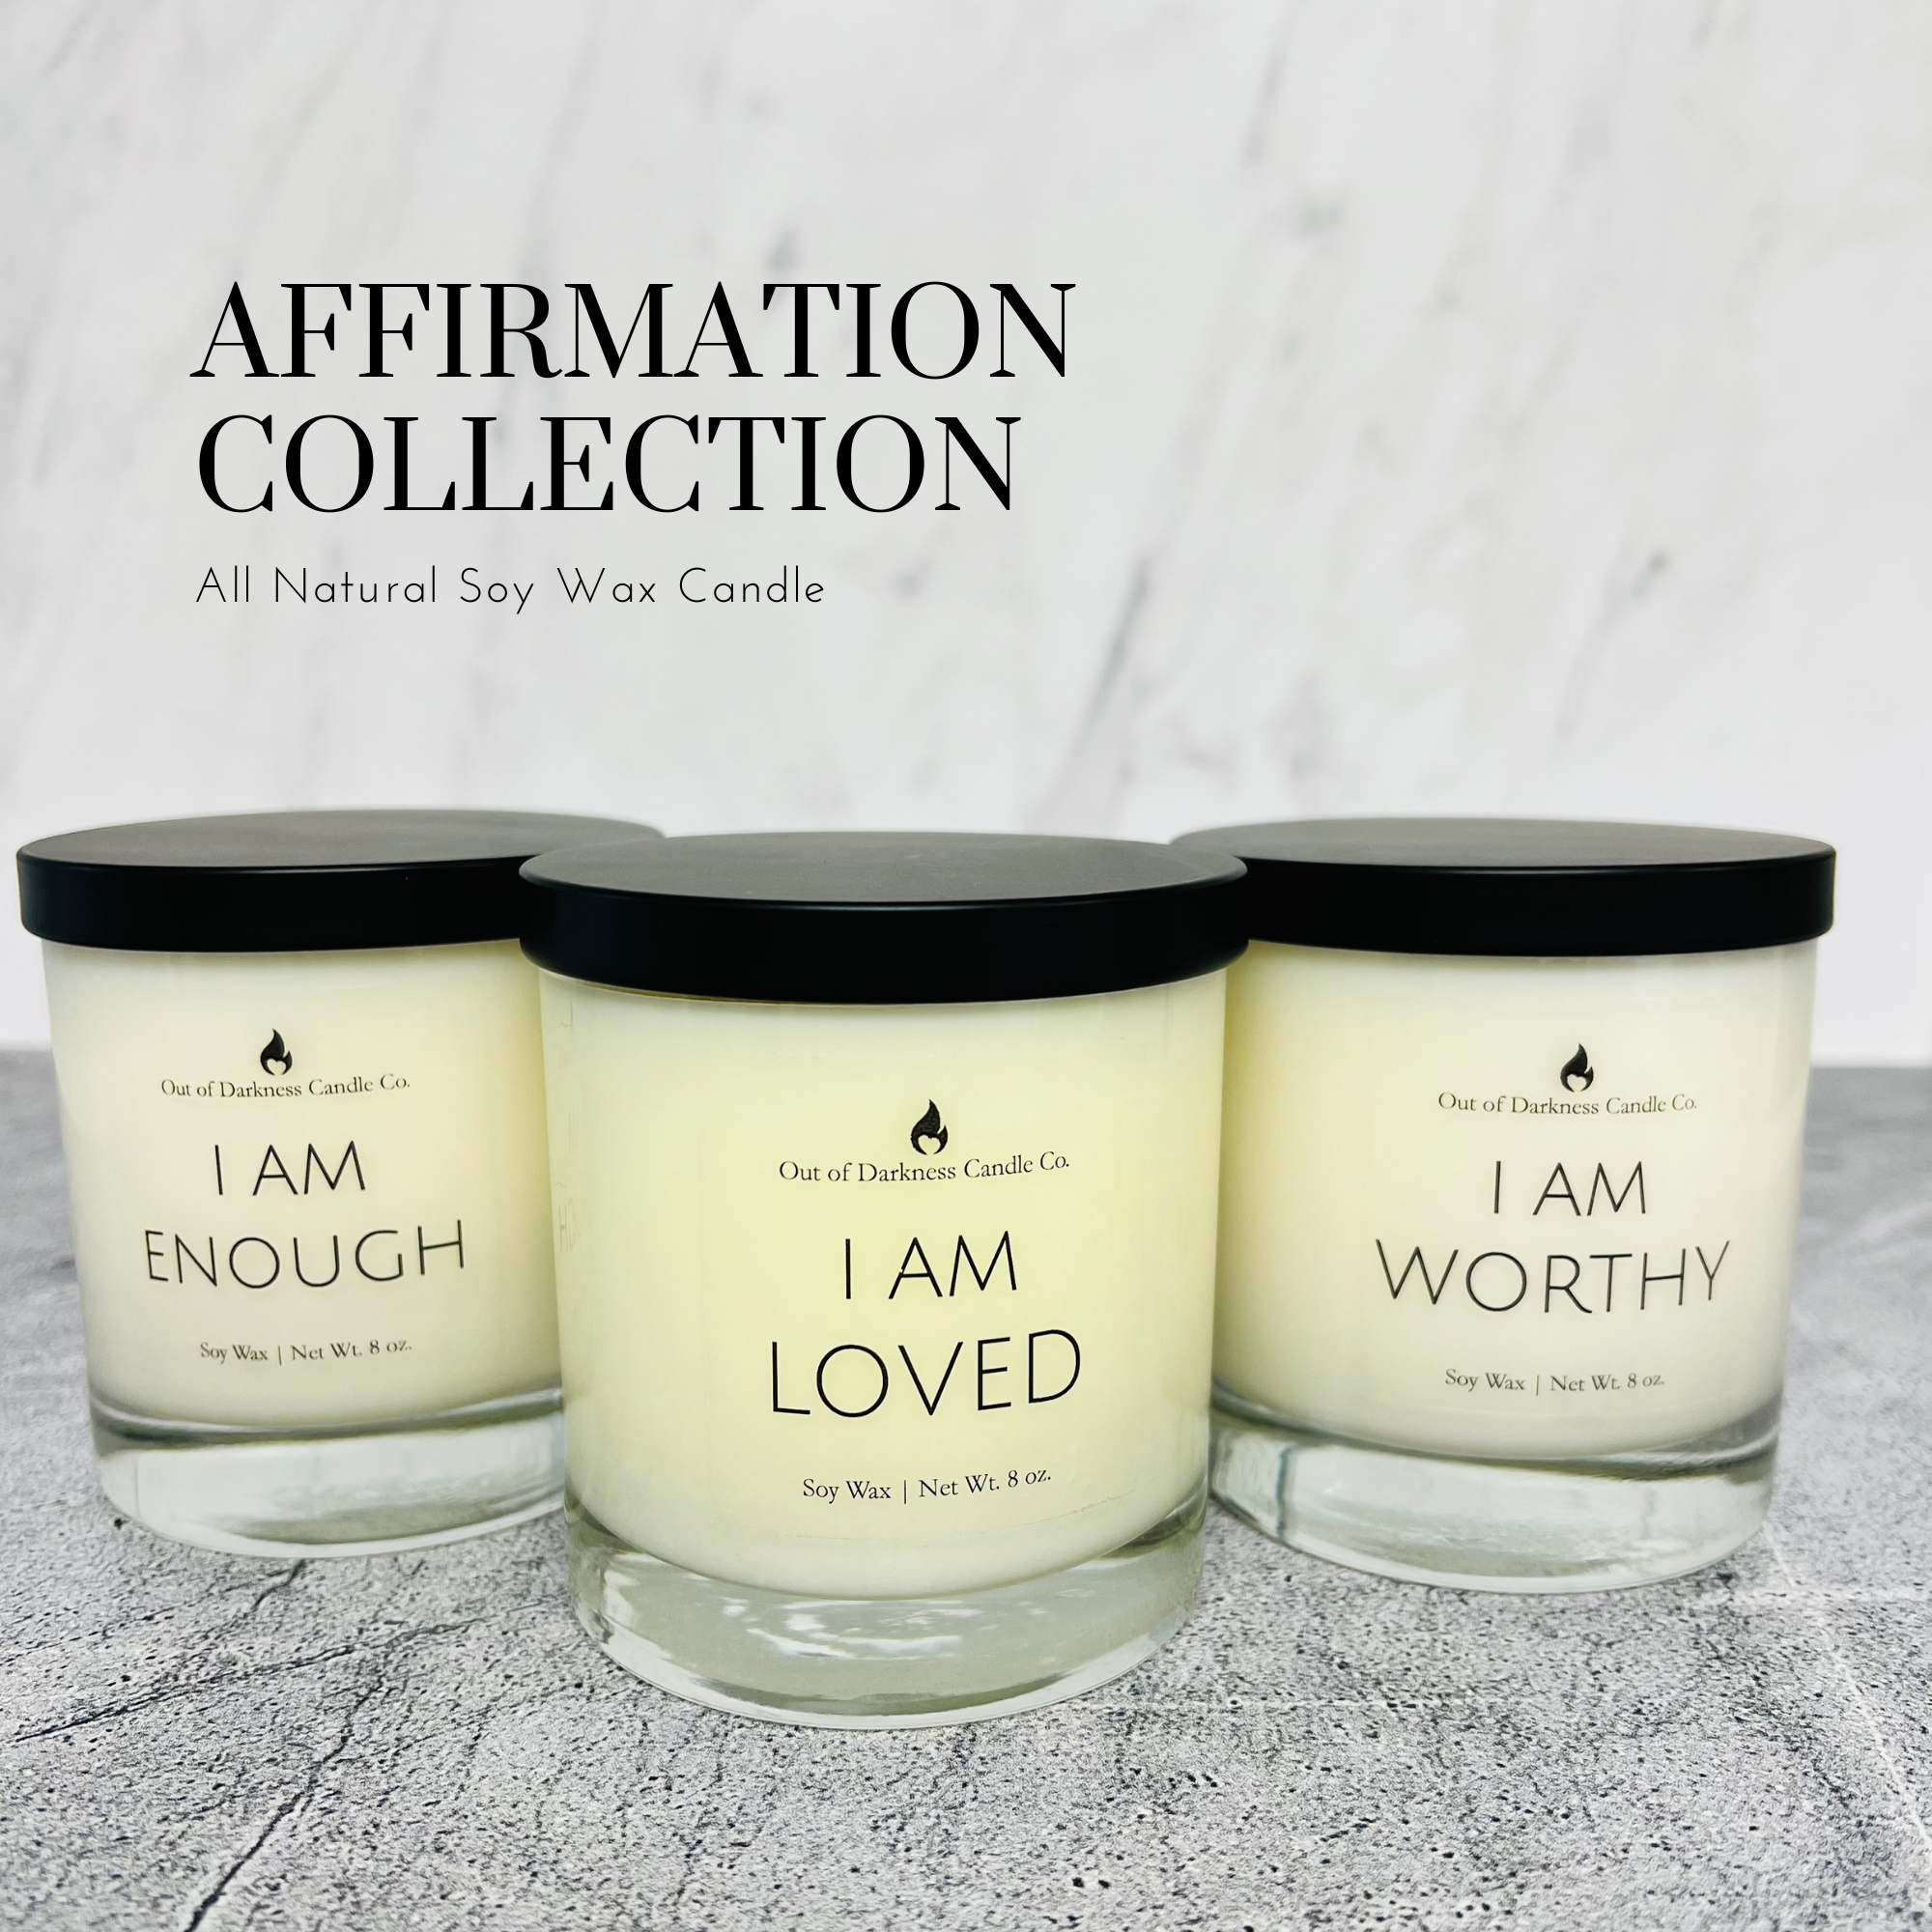 set of three candles that say I am enough, I am loved, I am worthy- affirmation collection all natural soy wax candle